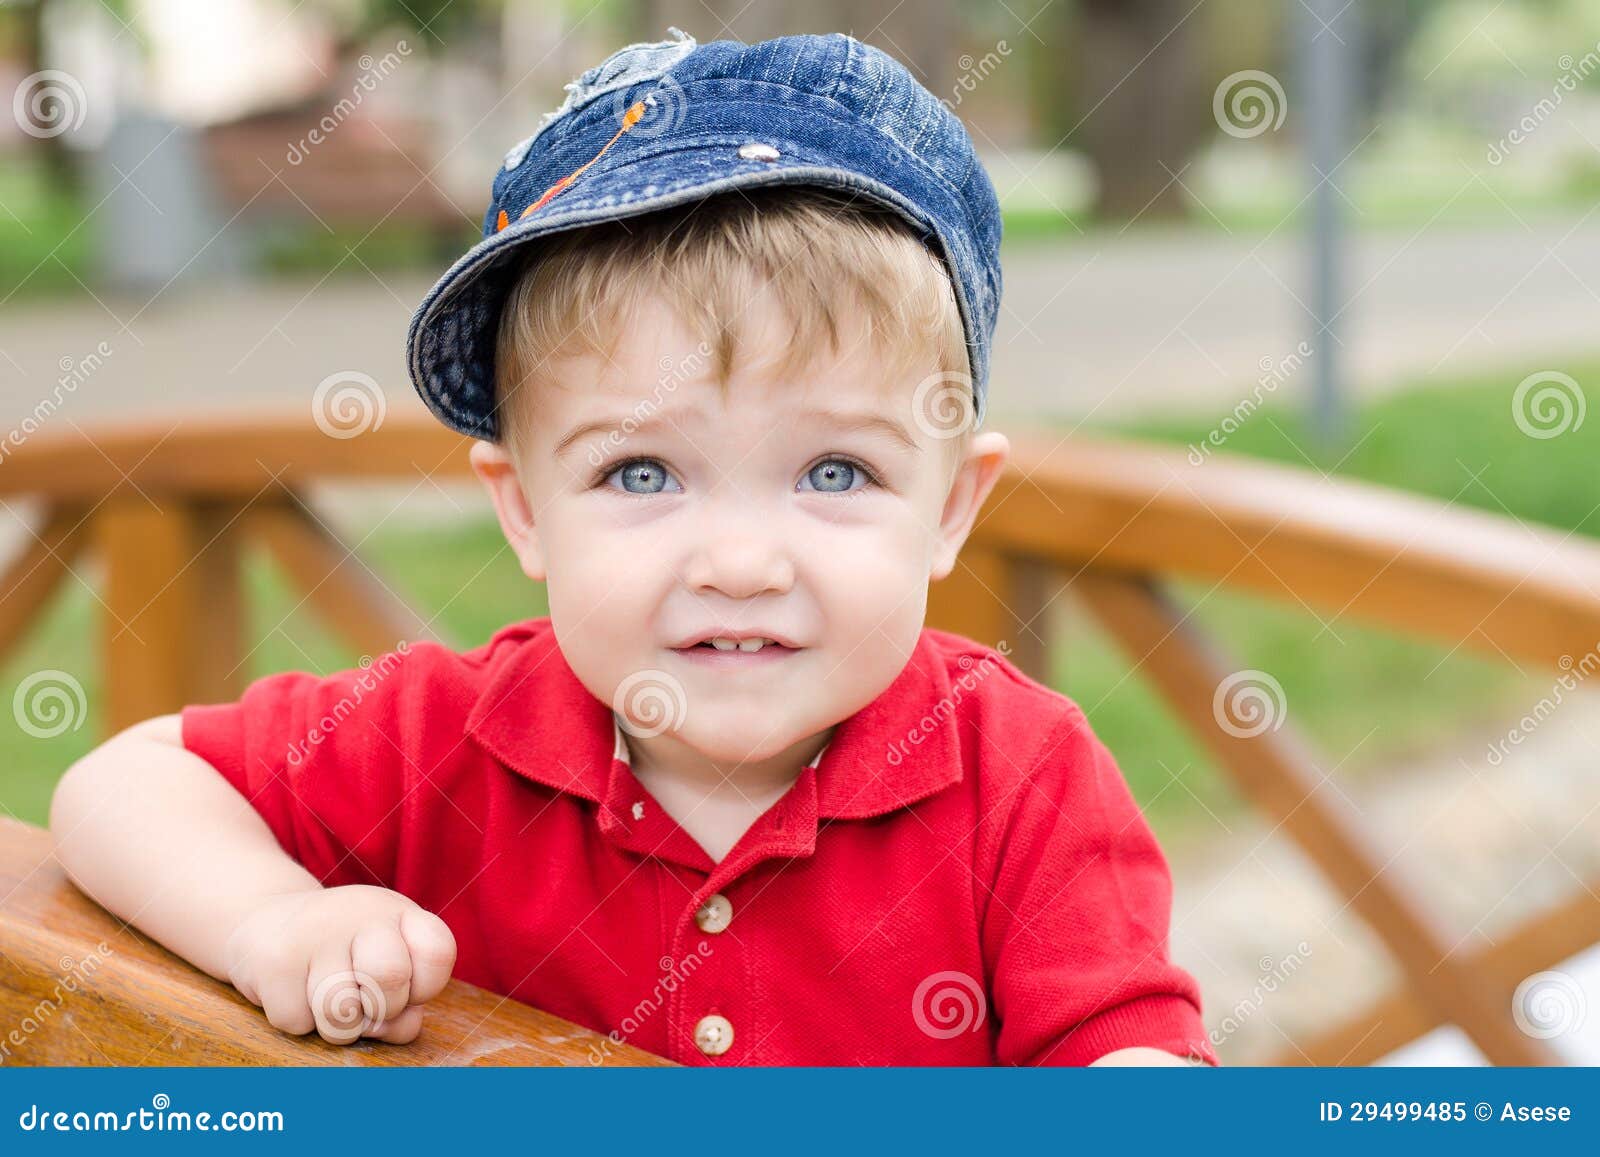 Boy making funny face stock image. Image of cute, outdoor - 29499485